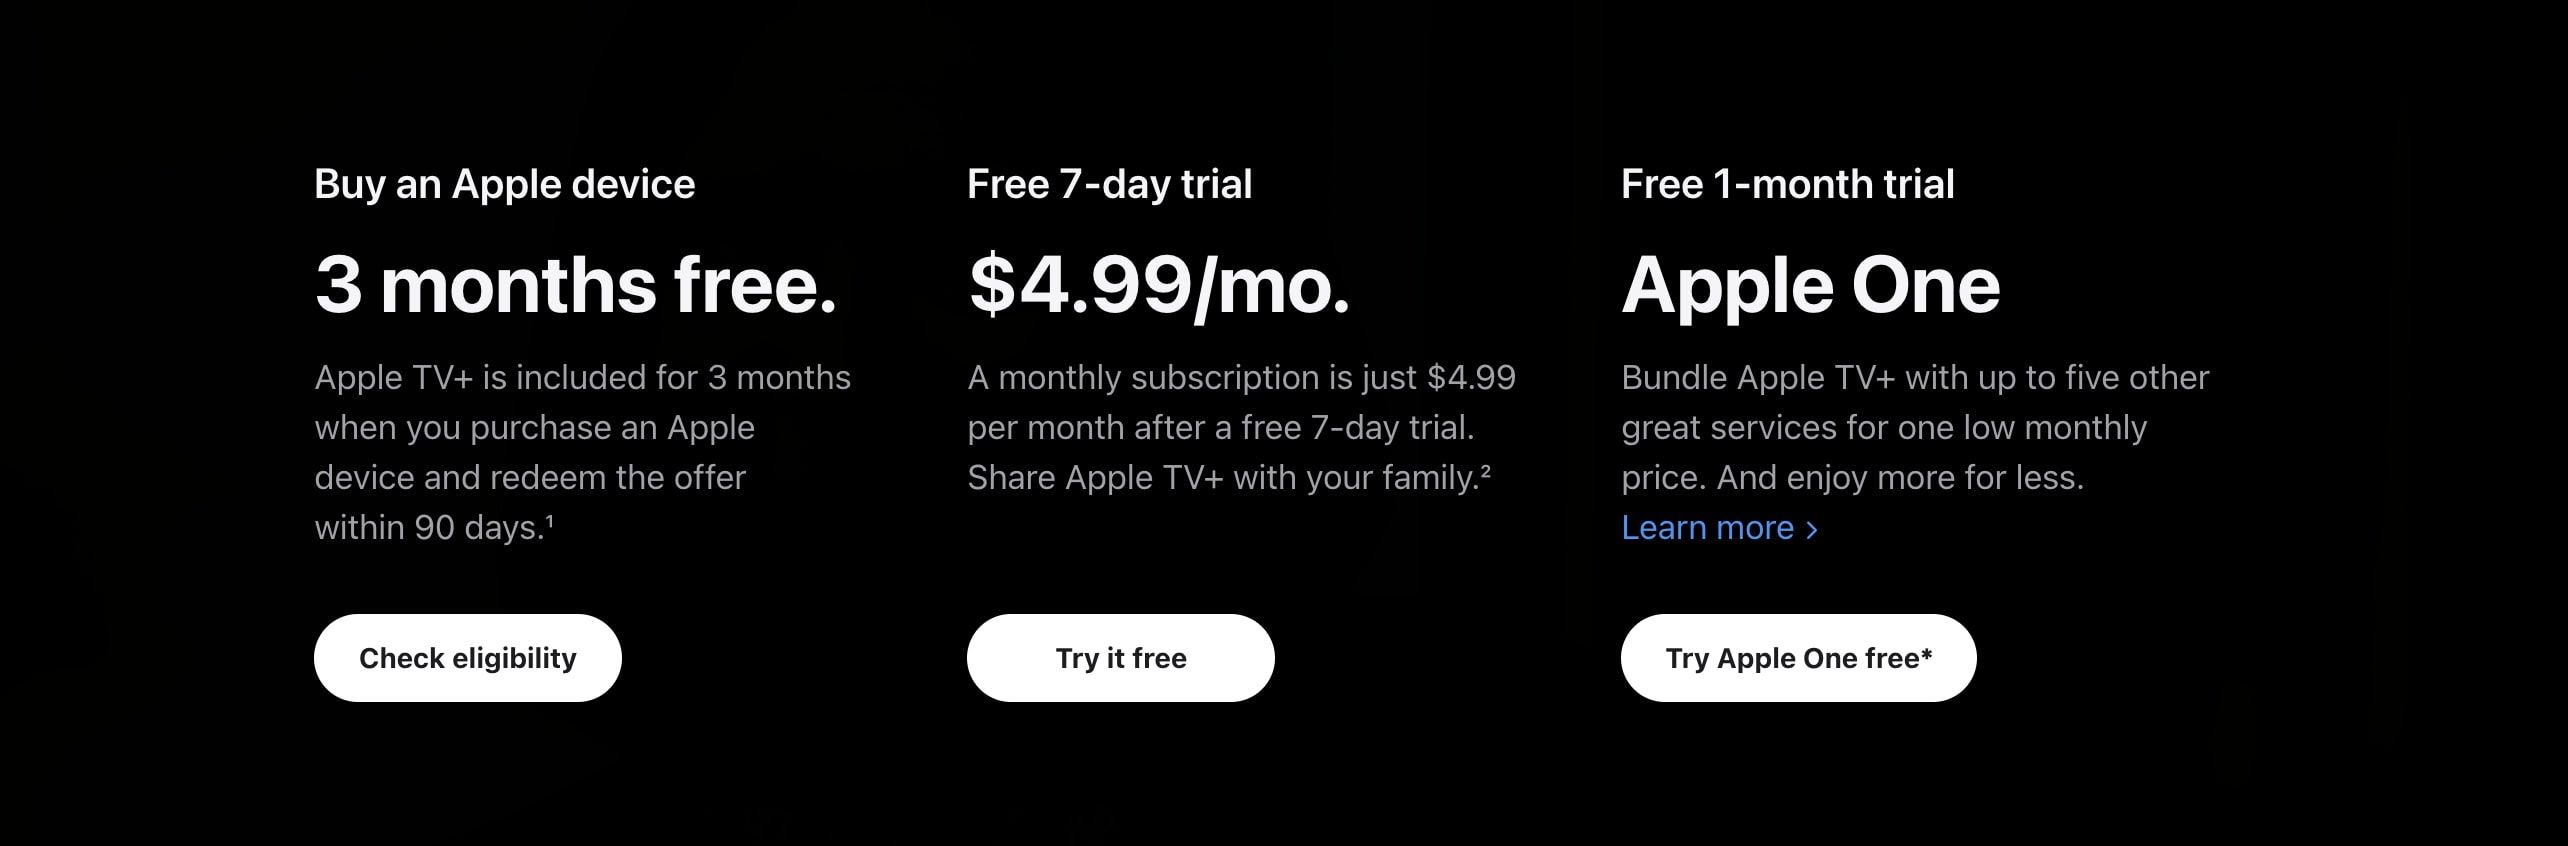 Apple TV+ Plans and pricing